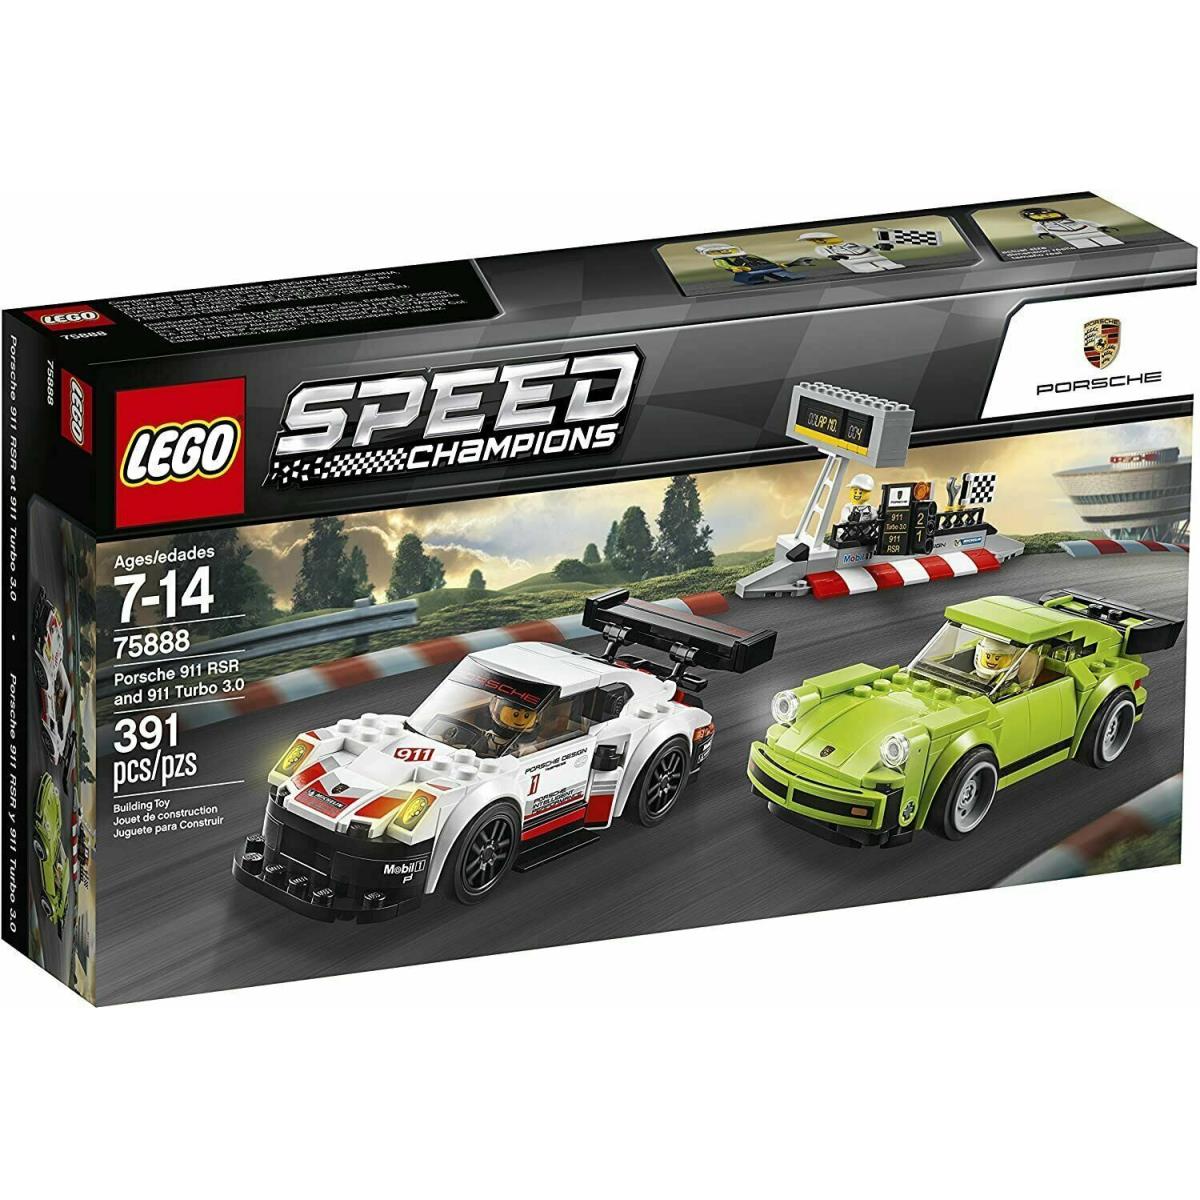 Official Lego Speed Champions: Porsche 911 Rsr and 911 Turbo 3.0 Set 75888